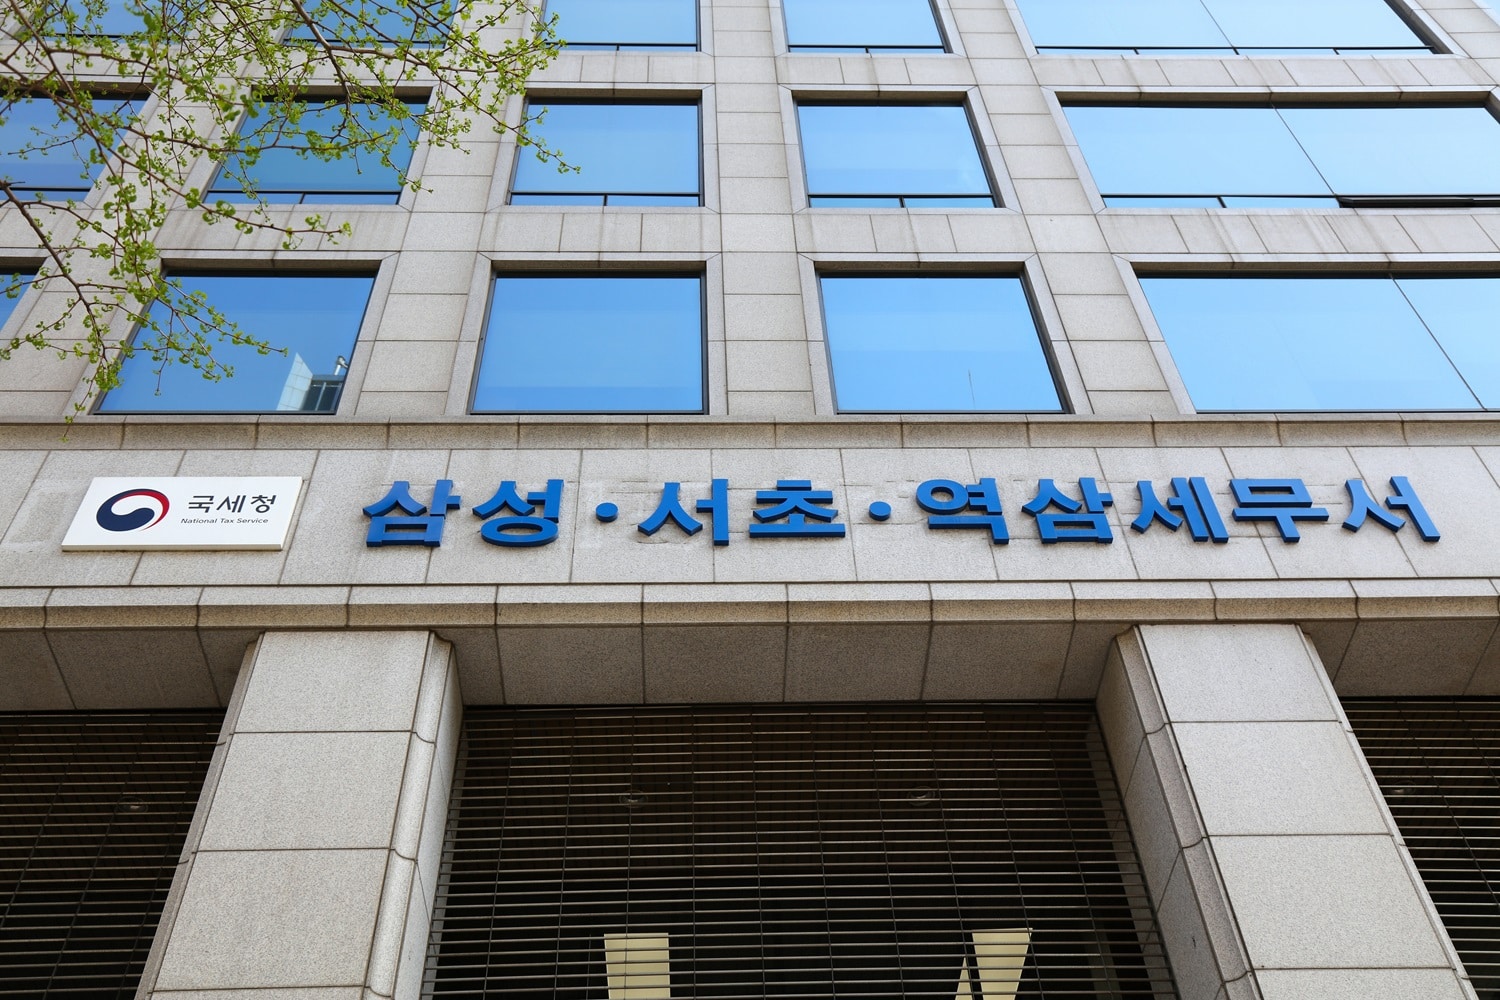 A tax office in the Gangnam District of Seoul, South Korea.